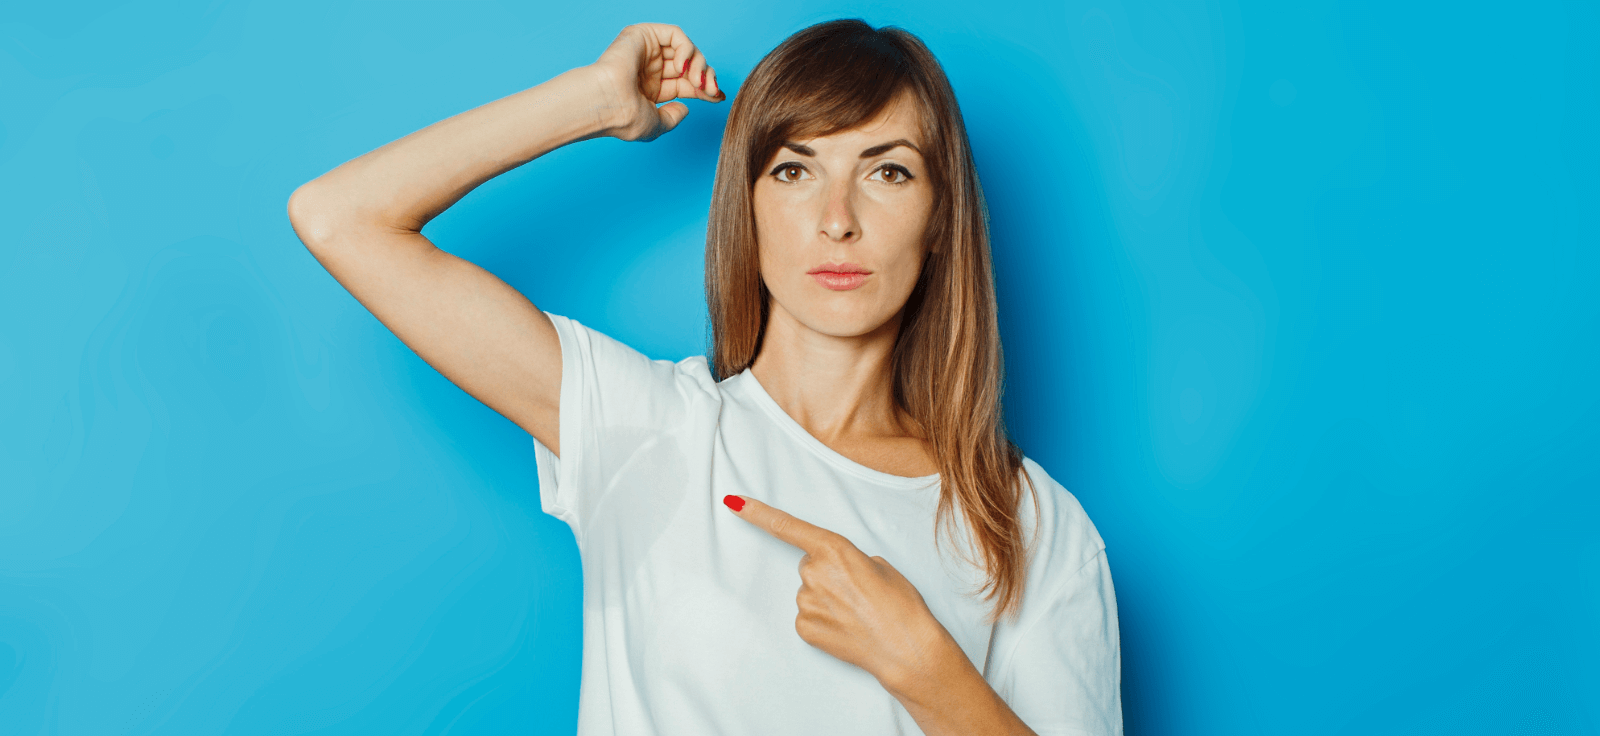 Chronic Pain Under the Left Armpit: Common Causes and Solution